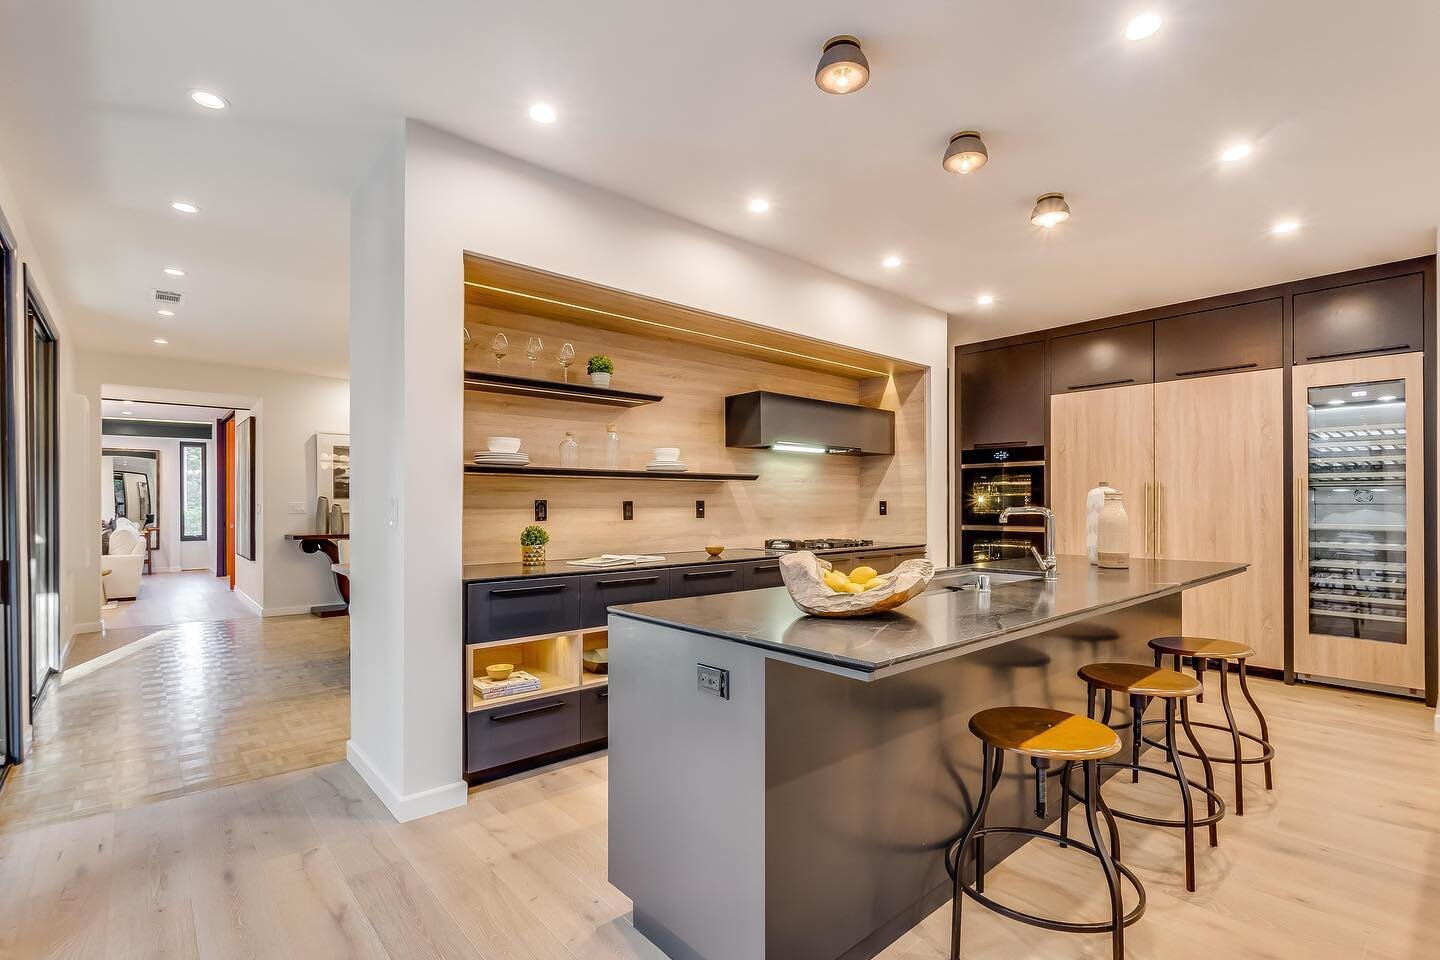 Kitchen Spotlight : Seamless Contemporary
The kitchen at 1335 Carnarvon Drive is custom-designed and marries sleek charcoal cabinets with warm wooden accents, proving modern design doesn&rsquo;t have to be sterile. Built-in appliances and a spacious 